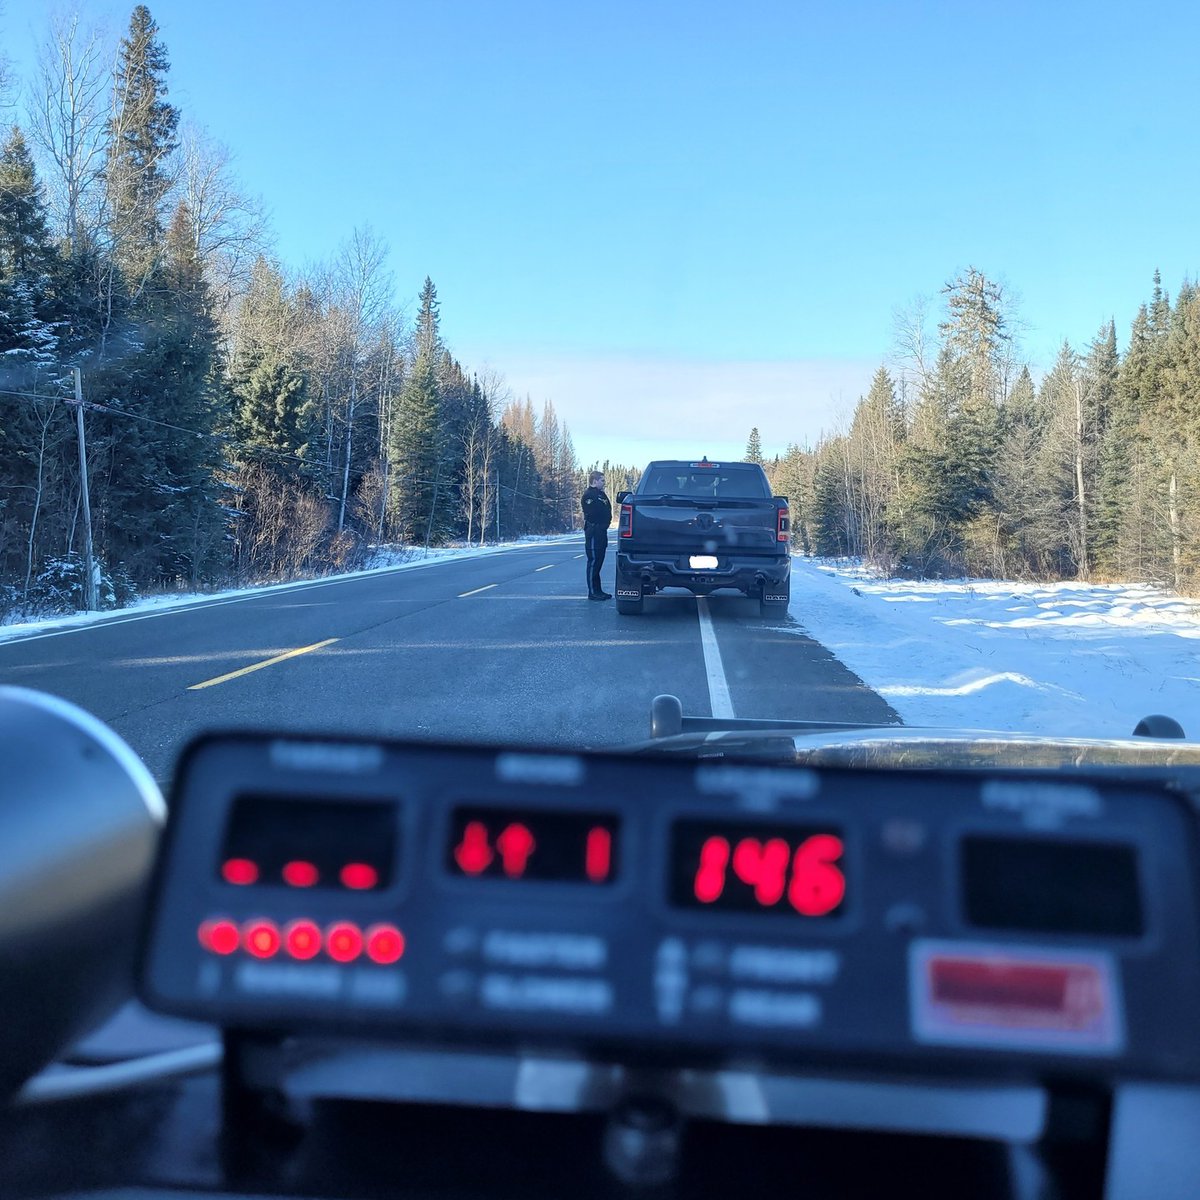 Members of the #RedLakeOPP have charged one individual for travelling 146 Km/Hr in a posted 80 Km/Hr zone and operating the vehicle without insurance. The driver is now facing a #14DayVehicleImpound and #30DayLicenceSuspension #SlowDown ^sm